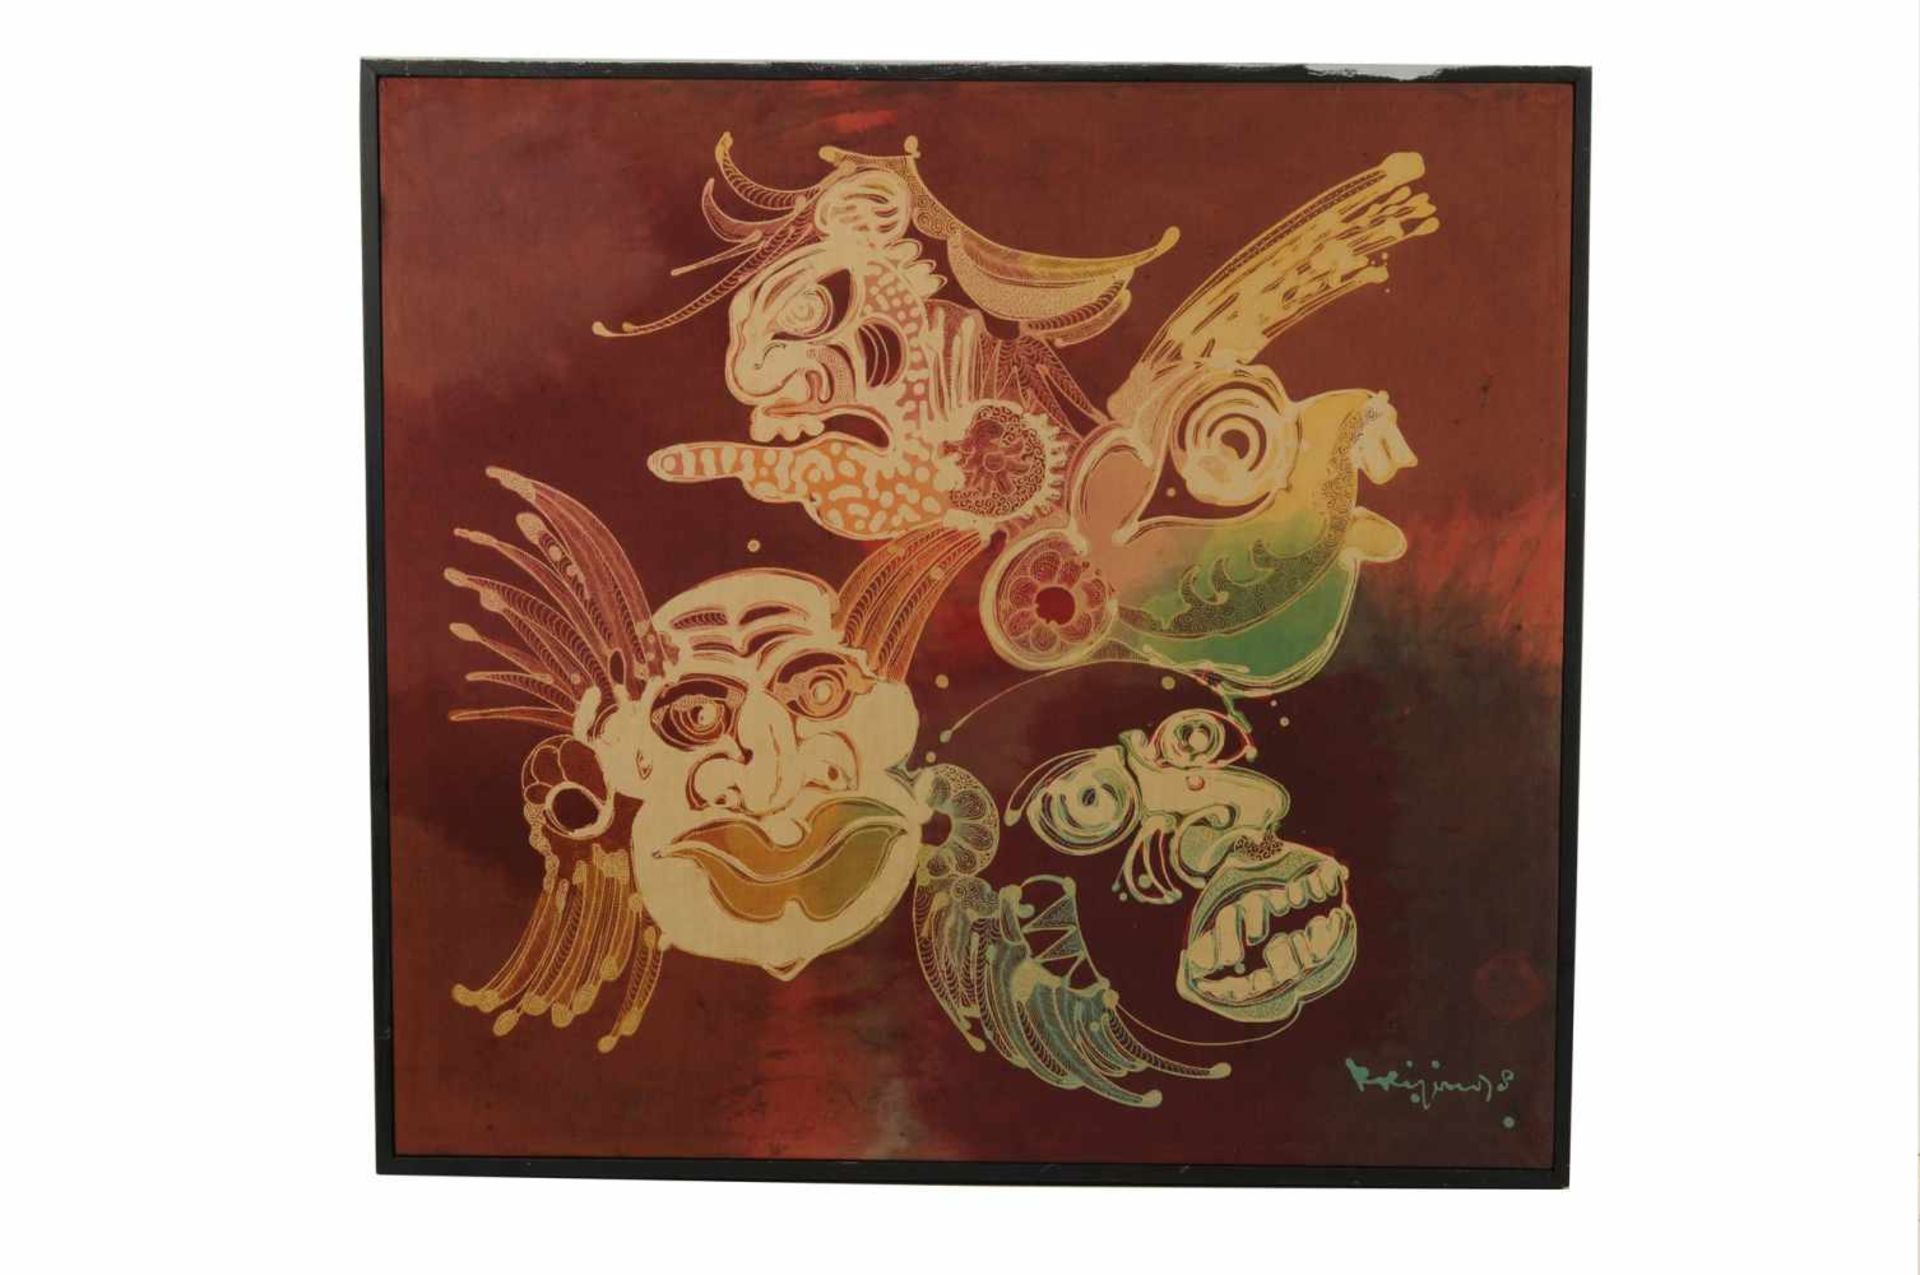 Krijono (1951-2011) 'Masks', signed and dated '79 lower right, batik on canvas. 79 x 85 cm. - Image 2 of 4